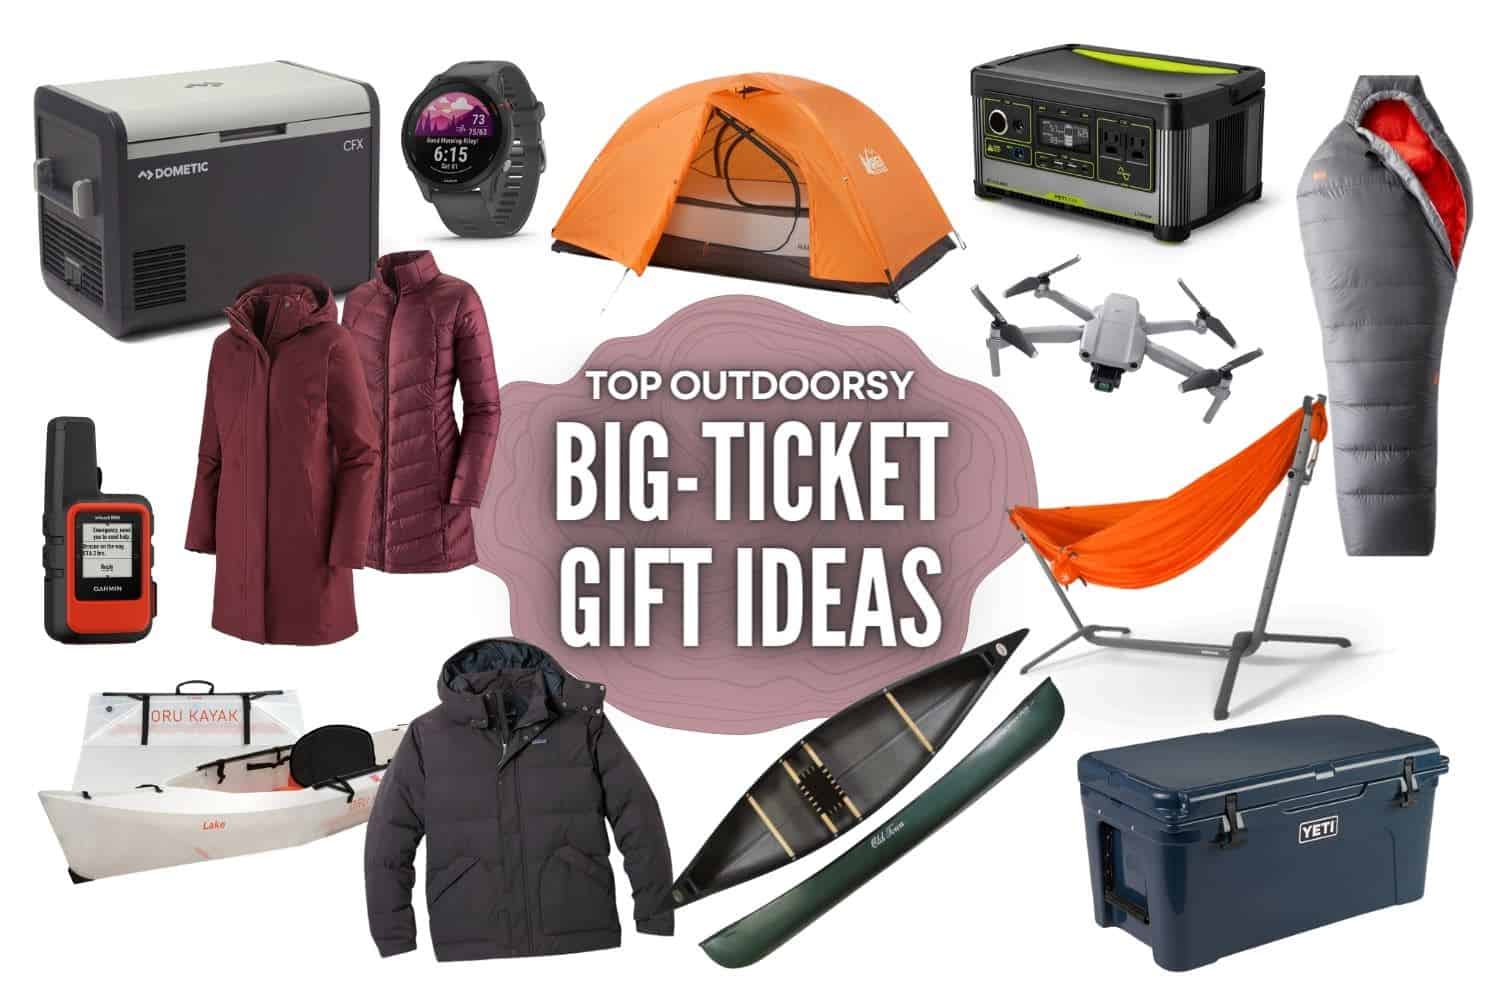 16 Splurge-Worthy Outdoor Gifts For Adventure and Camping